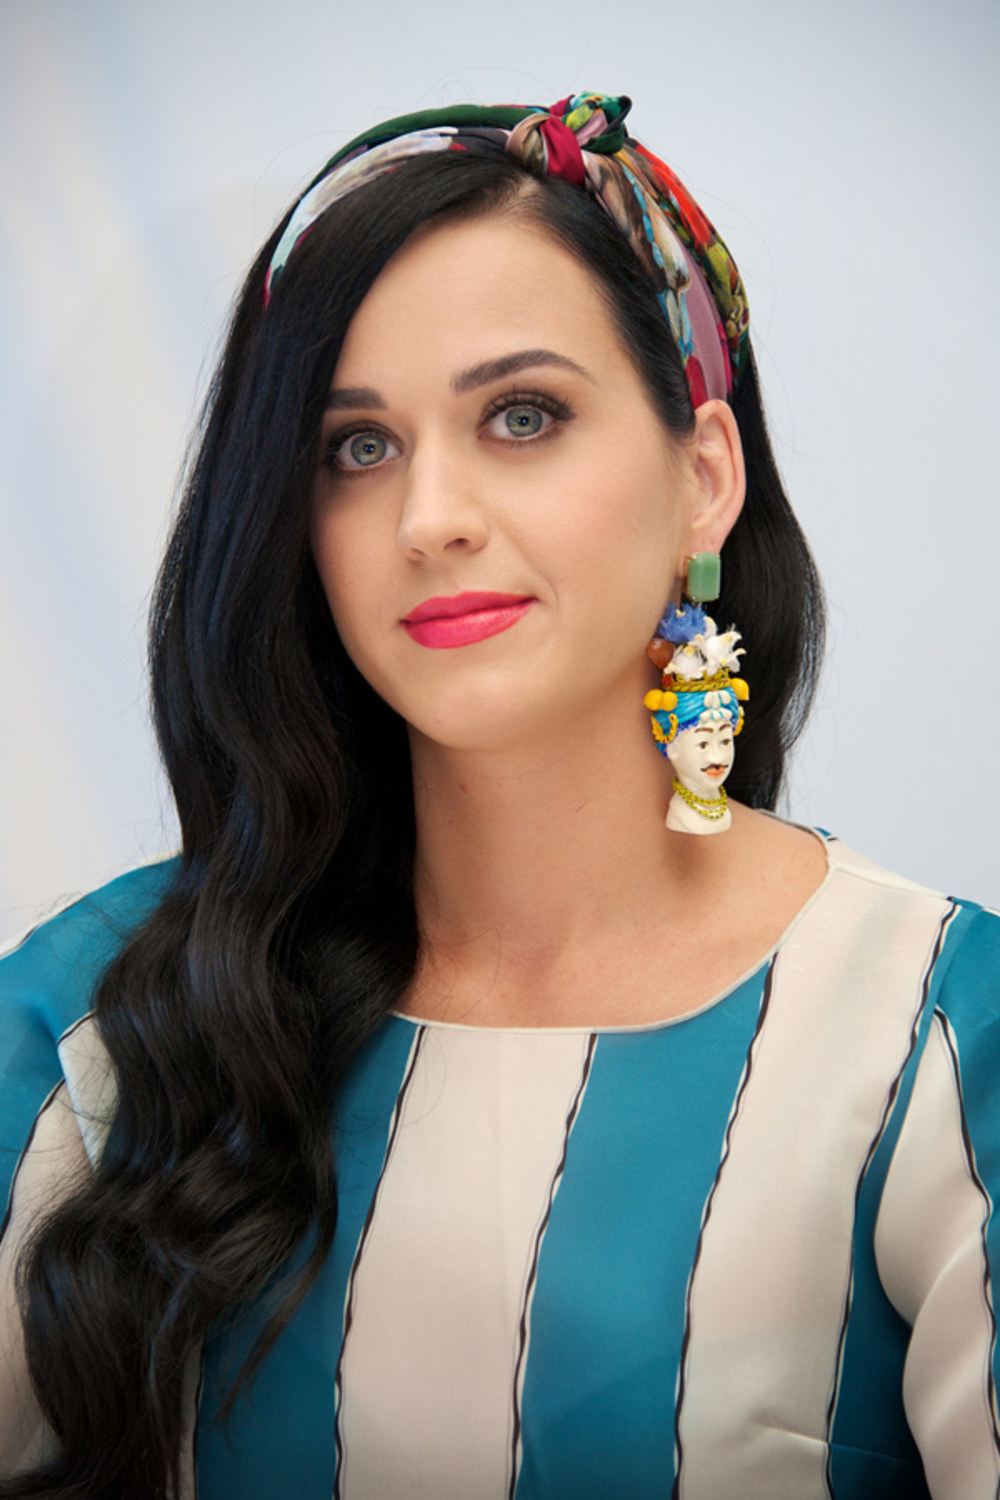 http://img4.wikia.nocookie.net/__cb20140819164648/katy-perry/pl/images/0/05/Katy_Perry2.jpg